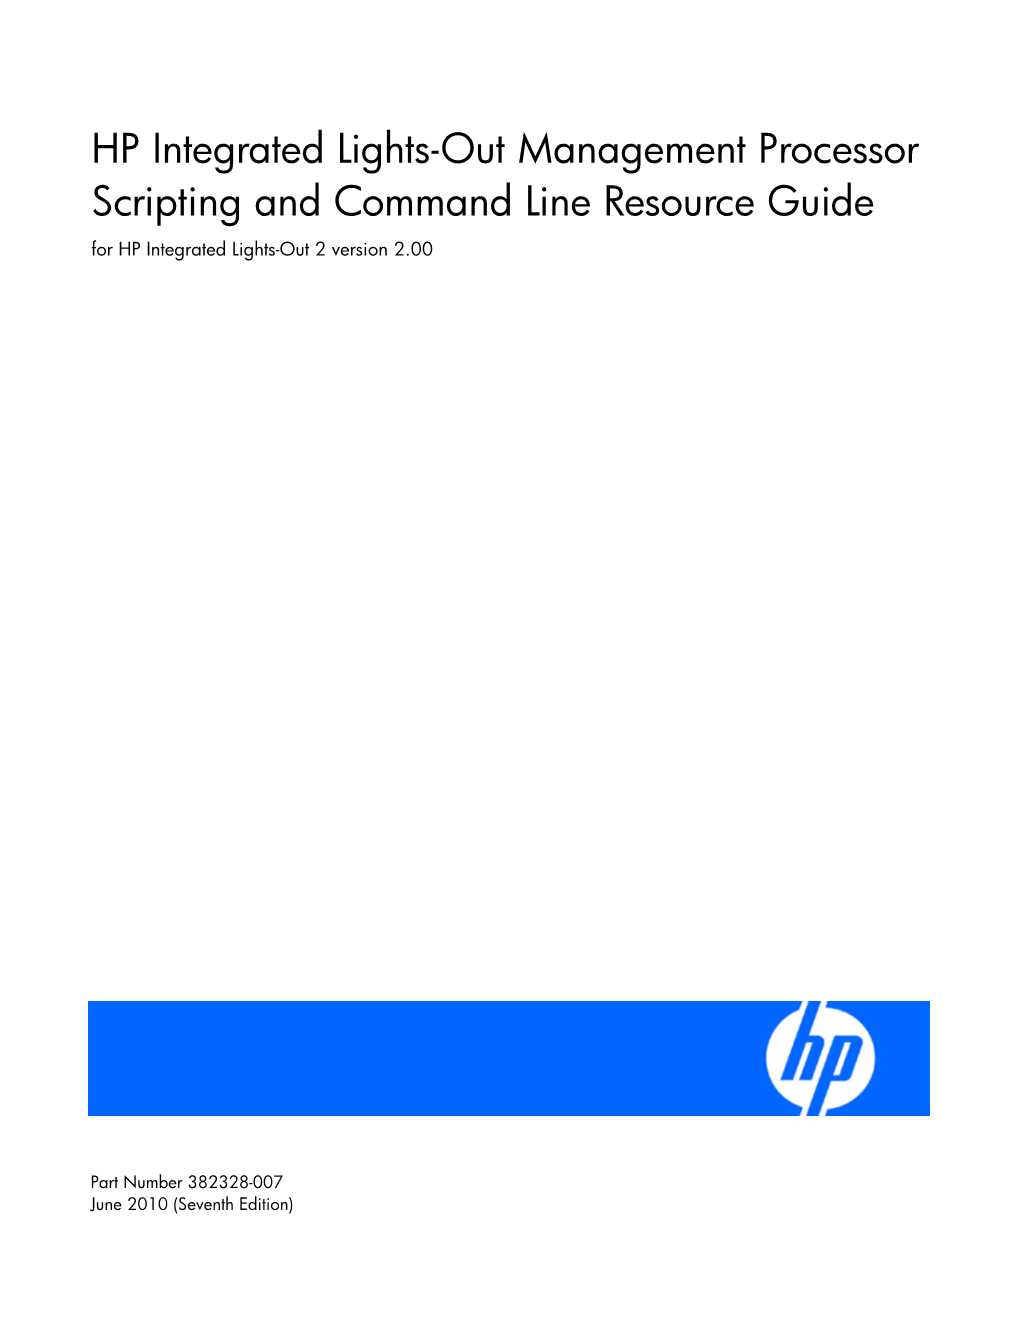 HP Integrated Lights-Out Management Processor Scripting and Command Line Resource Guide for HP Integrated Lights-Out 2 Version 2.00